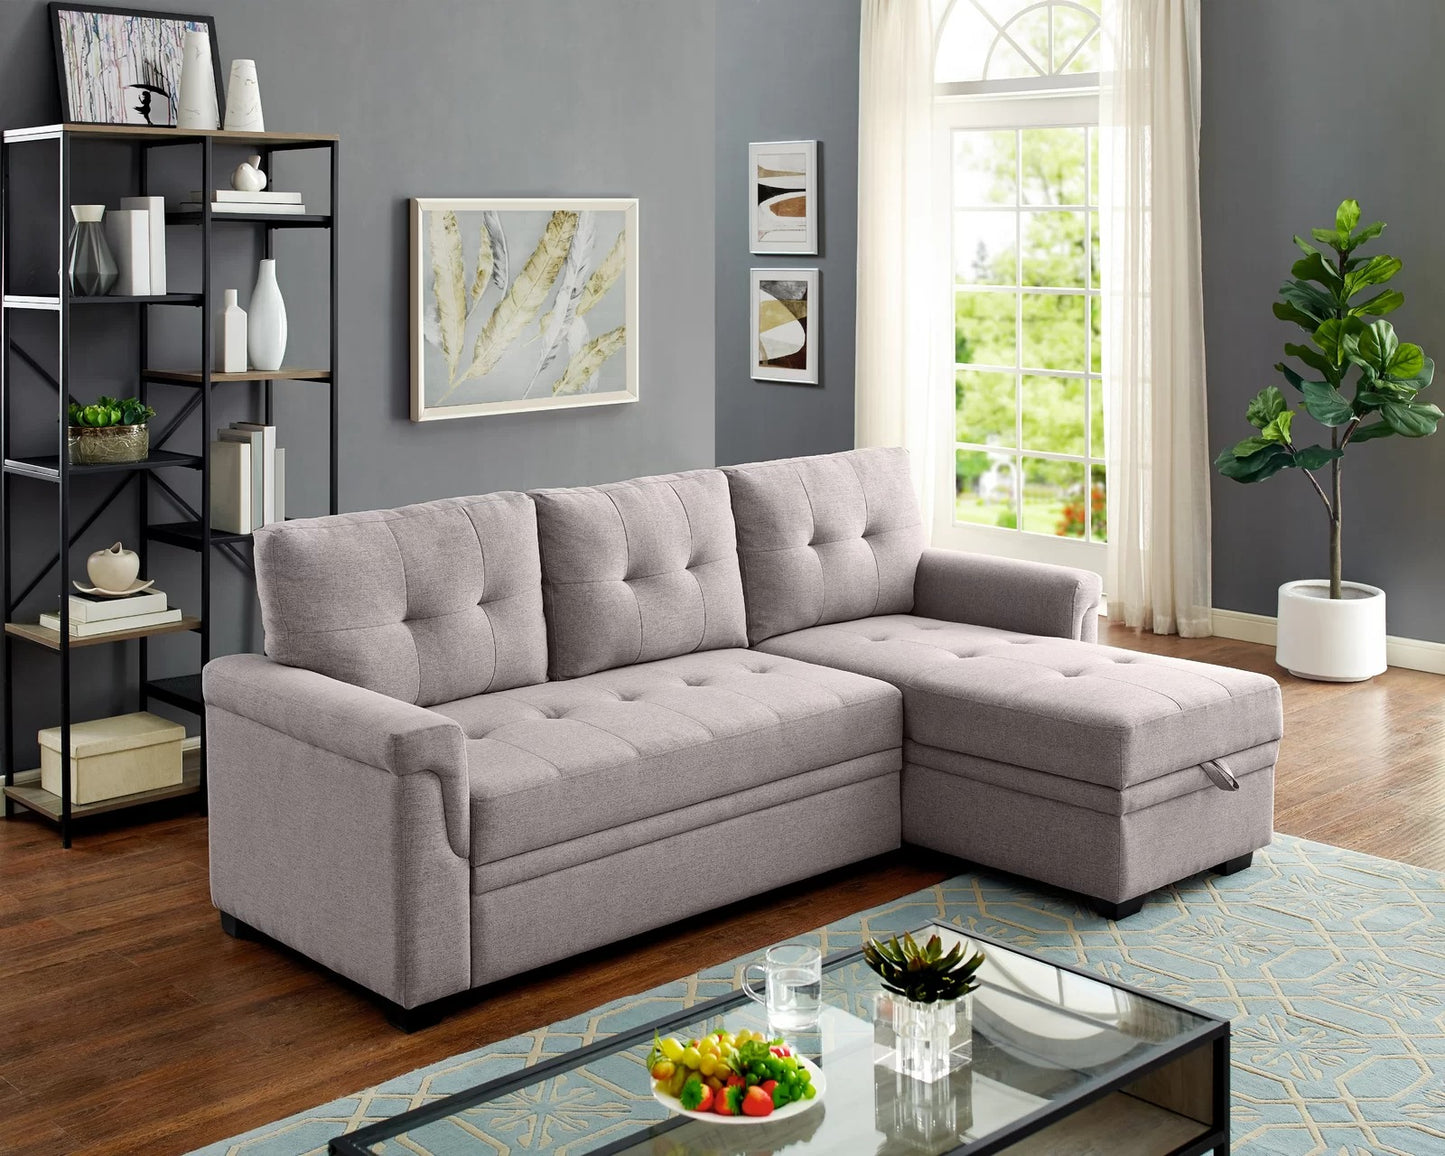 Sofa Cum Bed: Piece Upholstered Sectional